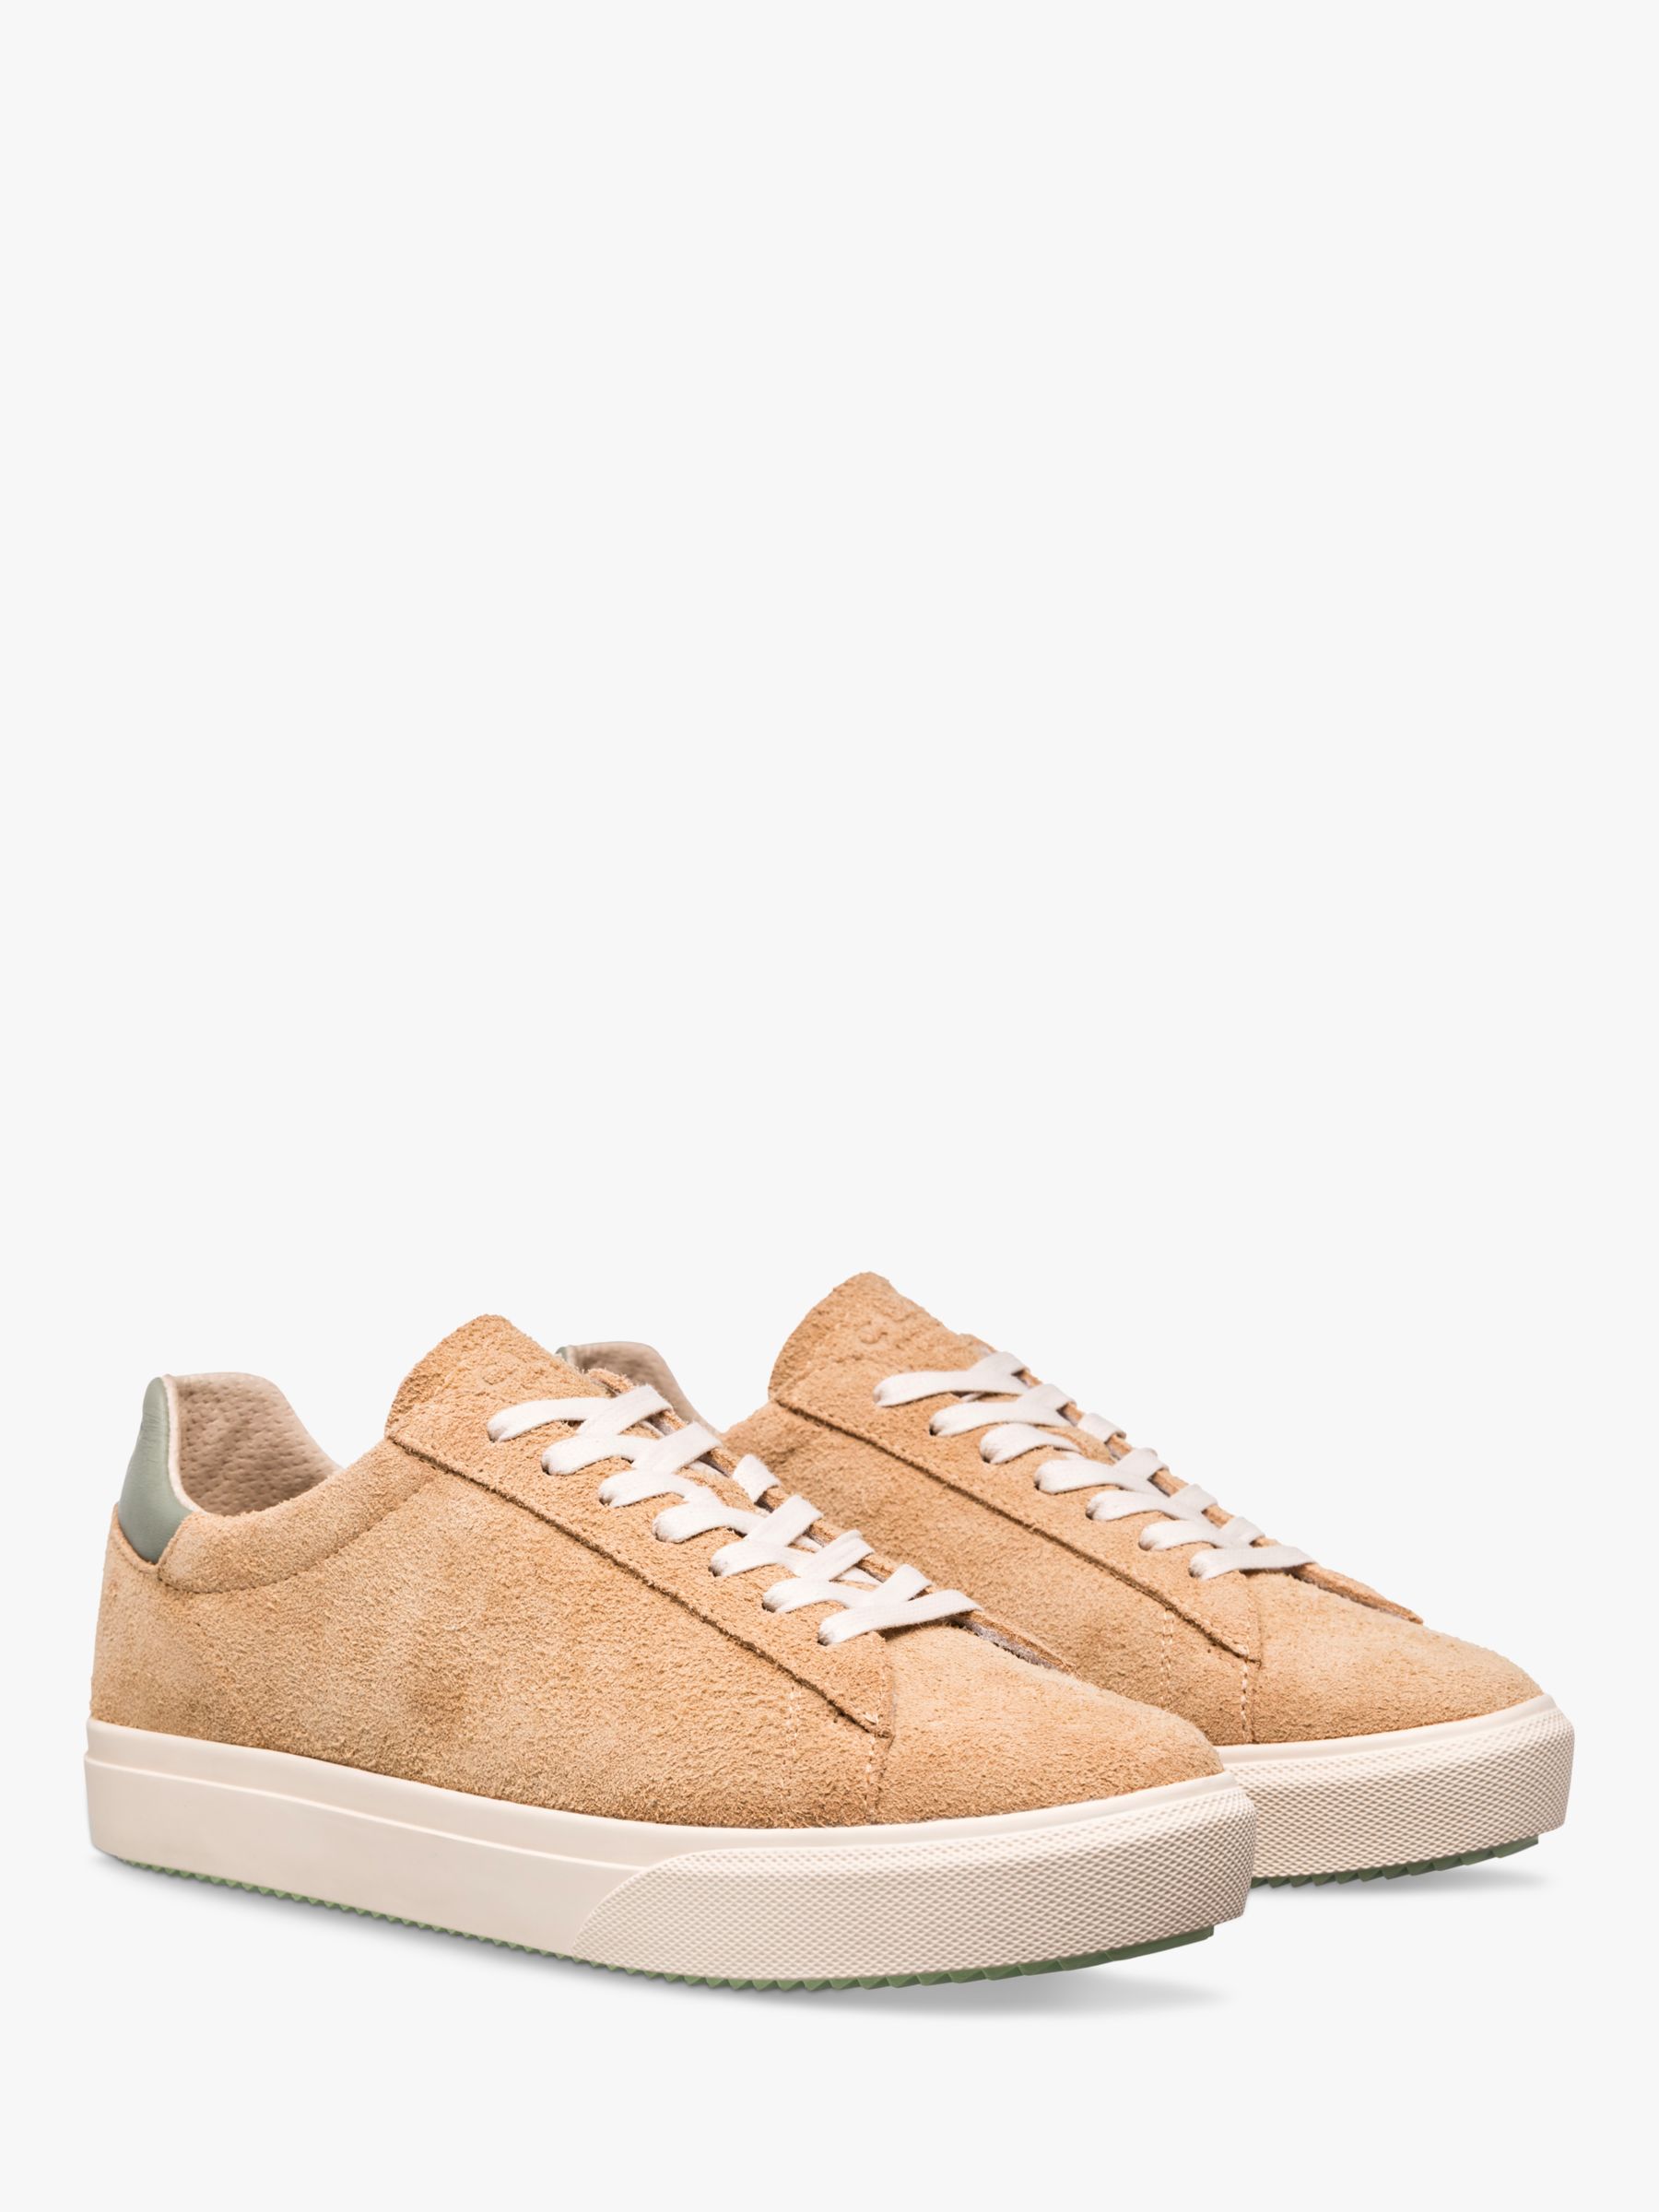 CLAE Bradley Venice Suede Lace Up Trainers, Starfish/Tea, 10.5